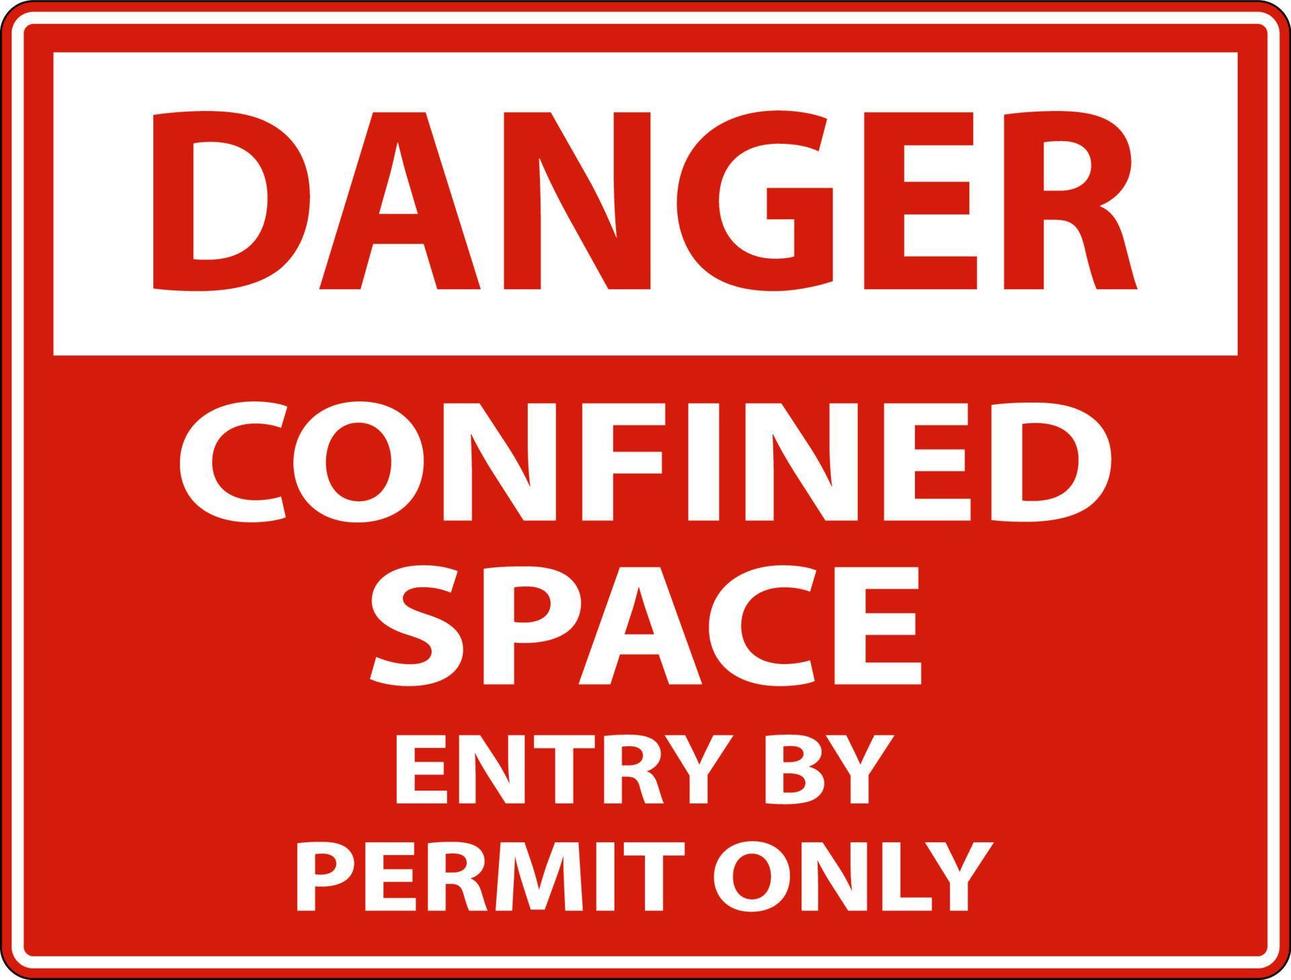 Danger Confined Space Entry By Permit Only Sign vector